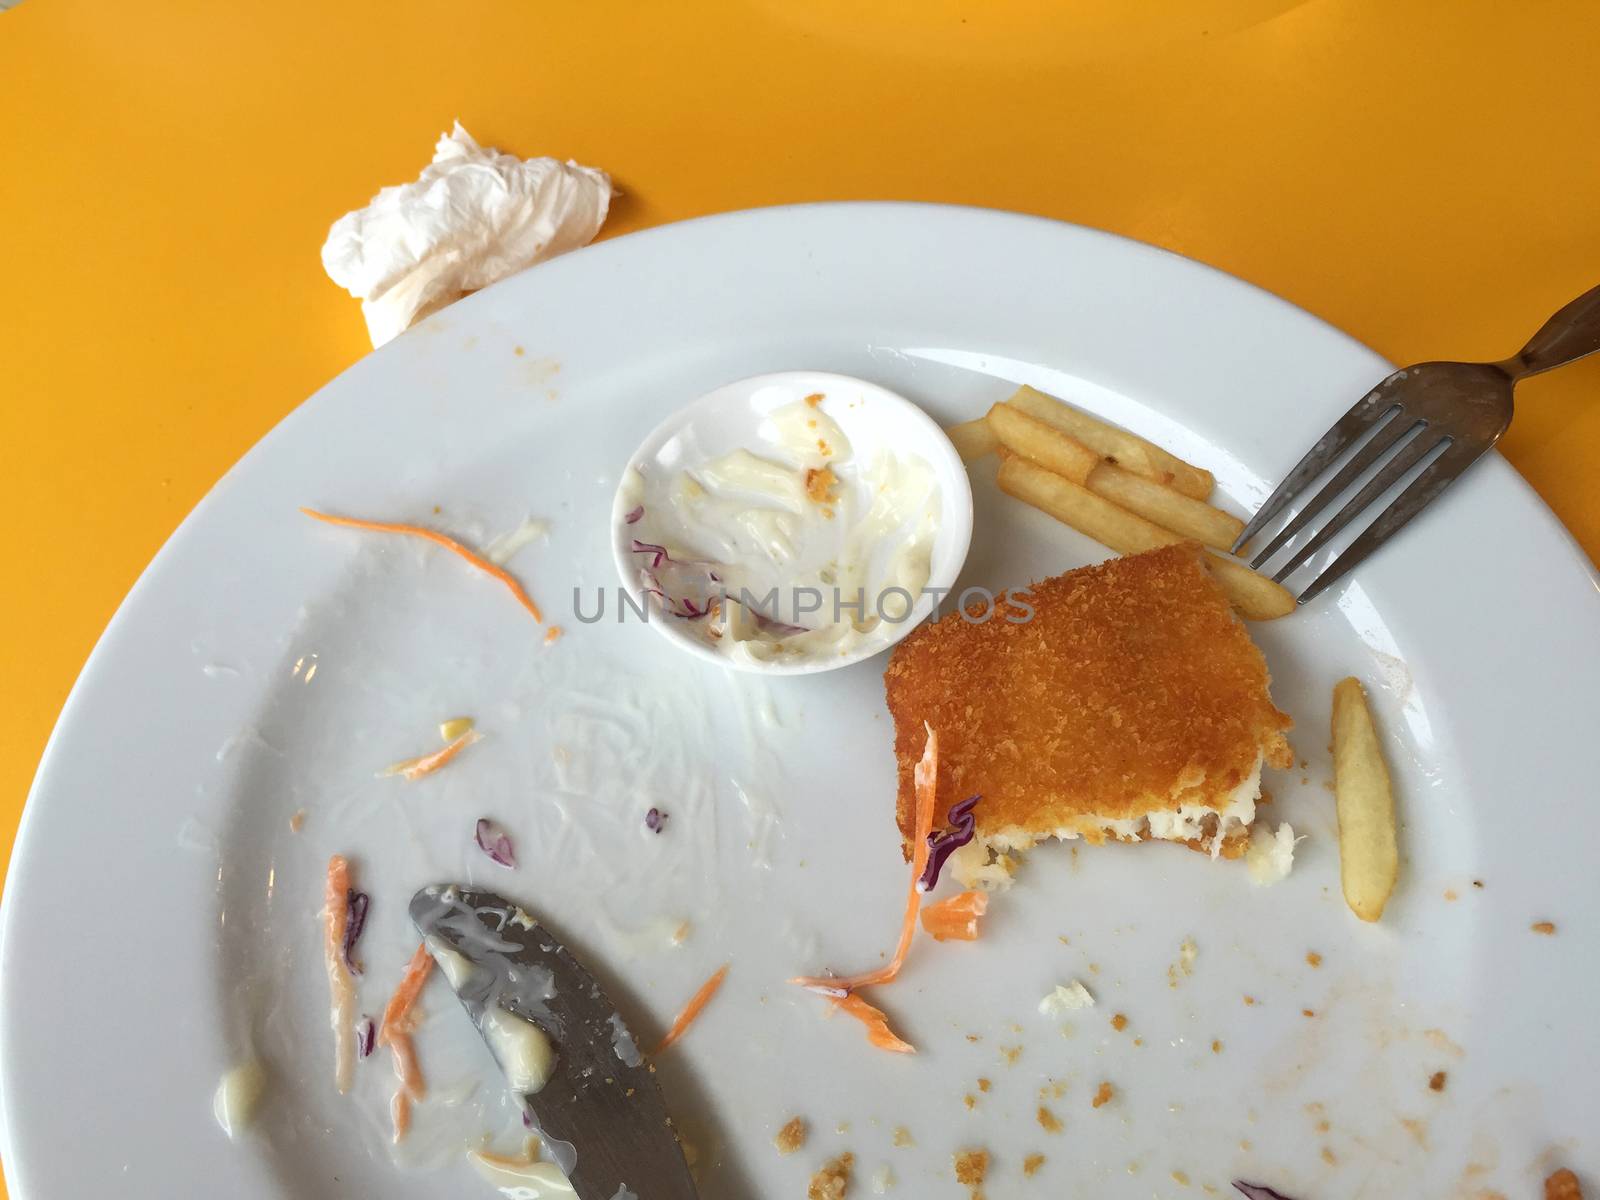 horizontal photo of fried fish remains after finish eating with used screwed paper tissue